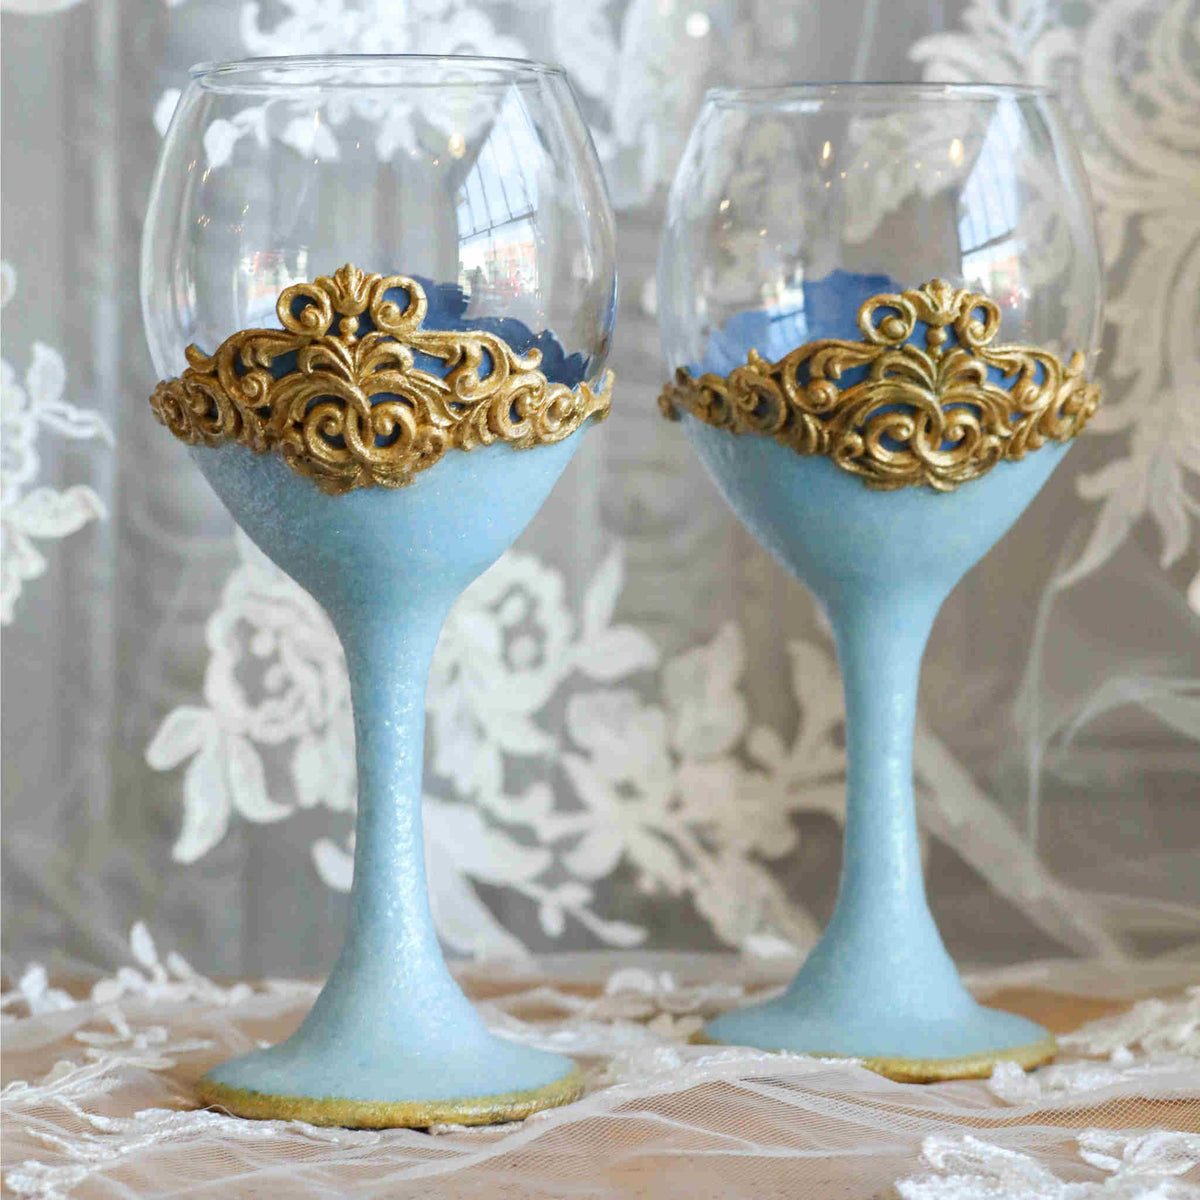 Add a touch of fairytale splendor and enchanted romance with our steamware set. It is the perfect way to add a little sparkle and a special touch of color. Makes a wonderful gift for engagements, showers, weddings and anniversaries. Each wine glass is hand-scuplted with polymer clay blue base and stem that shimmers with a touch of glitter. A gold leaf accents the bottom edge and &quot;lace&quot; top.